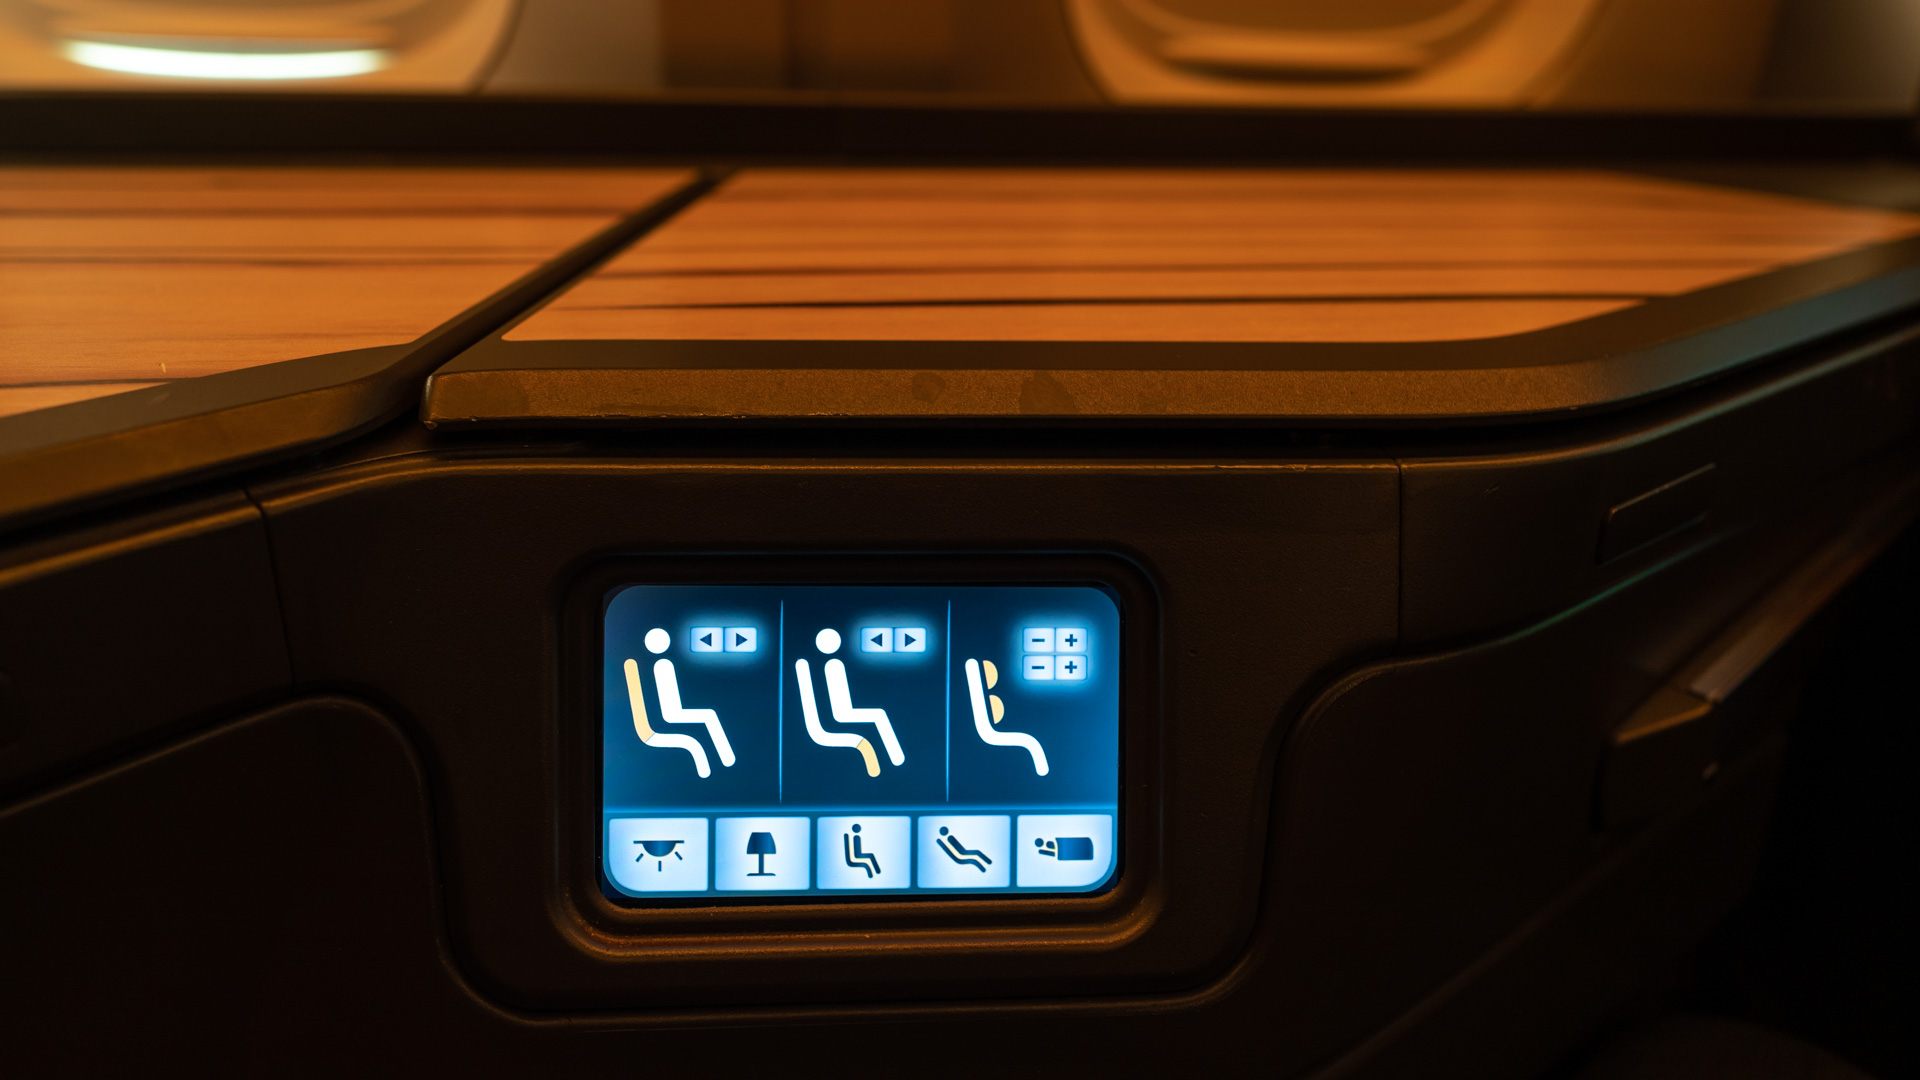 China Airlines Boeing 777 Business Class seat controls